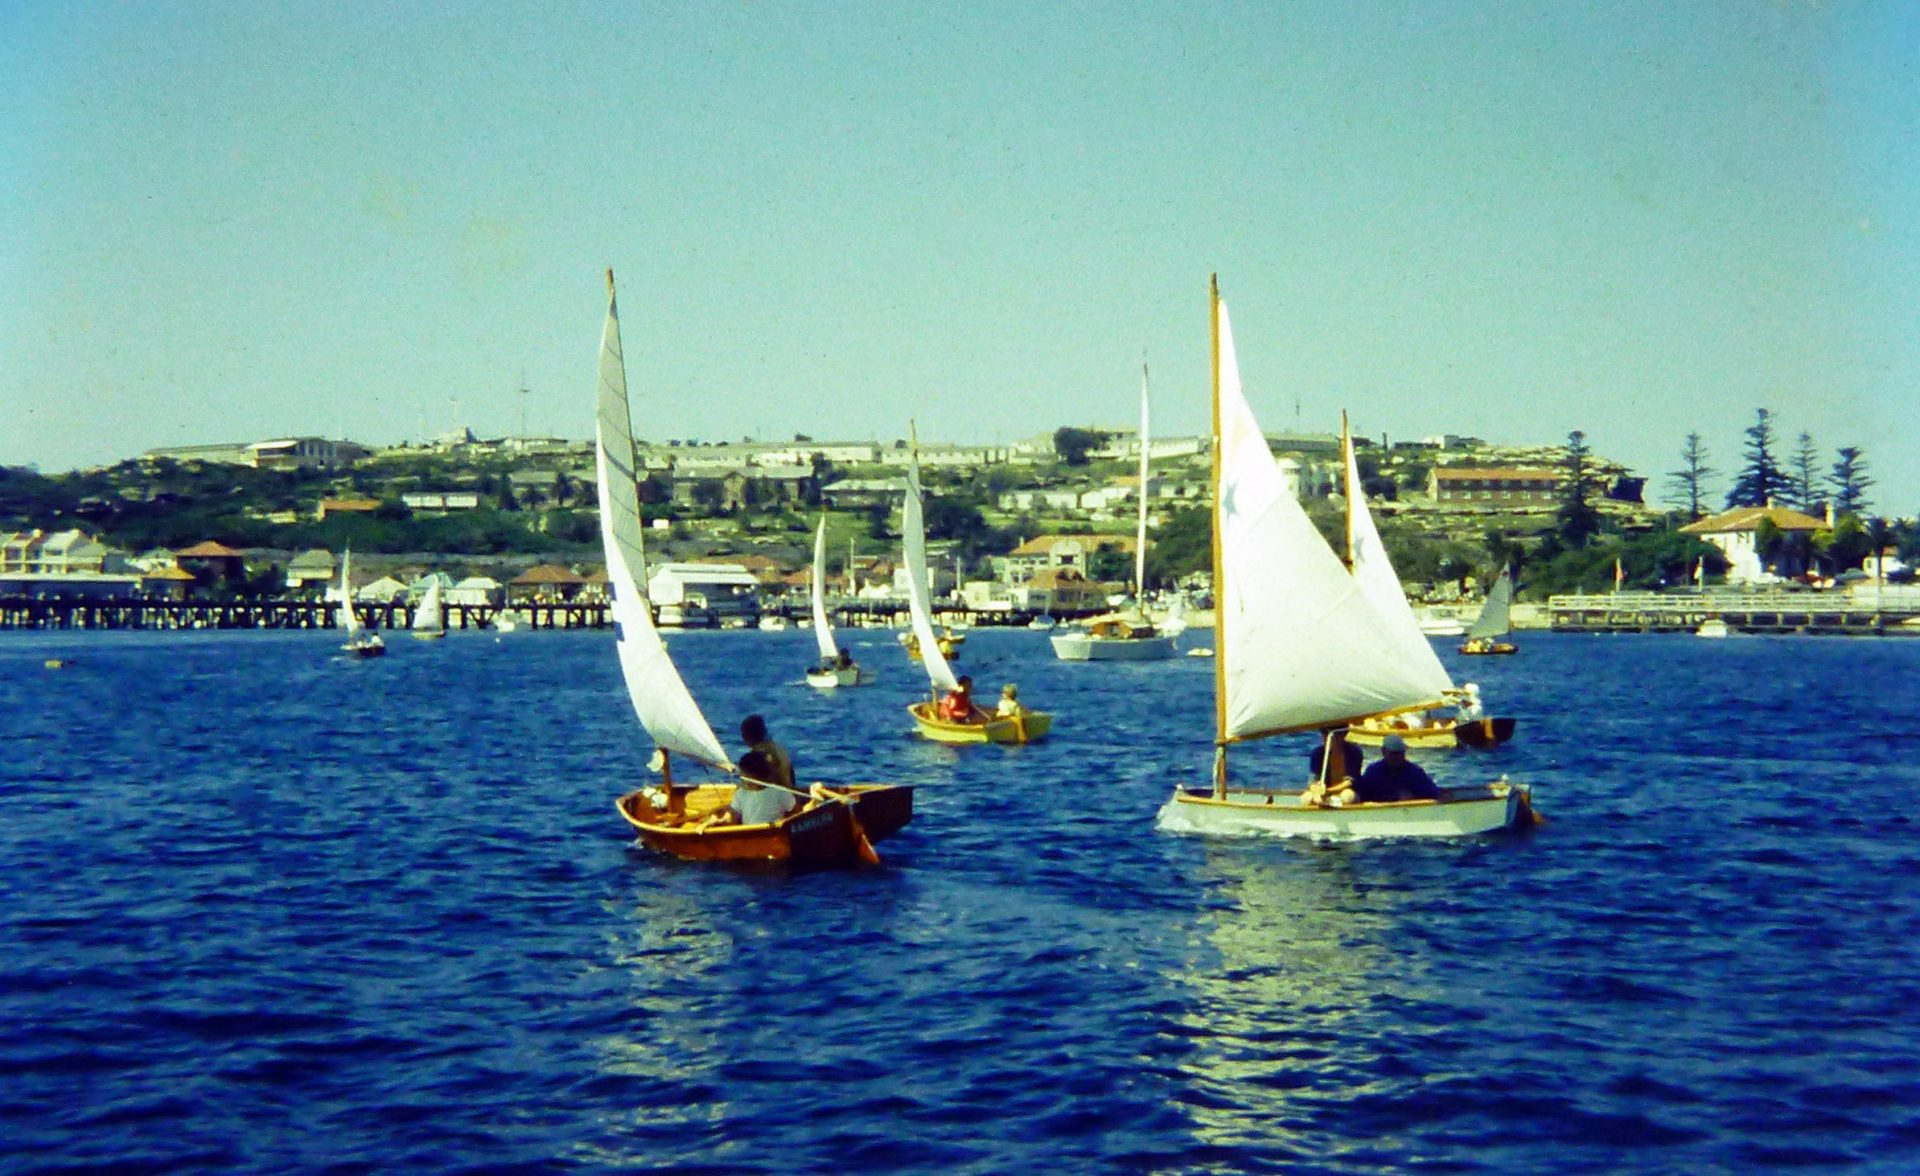 The sabot RAMBLER (seen here at Watsons Bay) was built by our uncle Norm Brown, it was a beautiful boat but we sucked sailing it. Norm was a highly regarded builder, Rob Brown's father. Norm built a series of boats for Rob, and a couple of trailer sailers for himself.